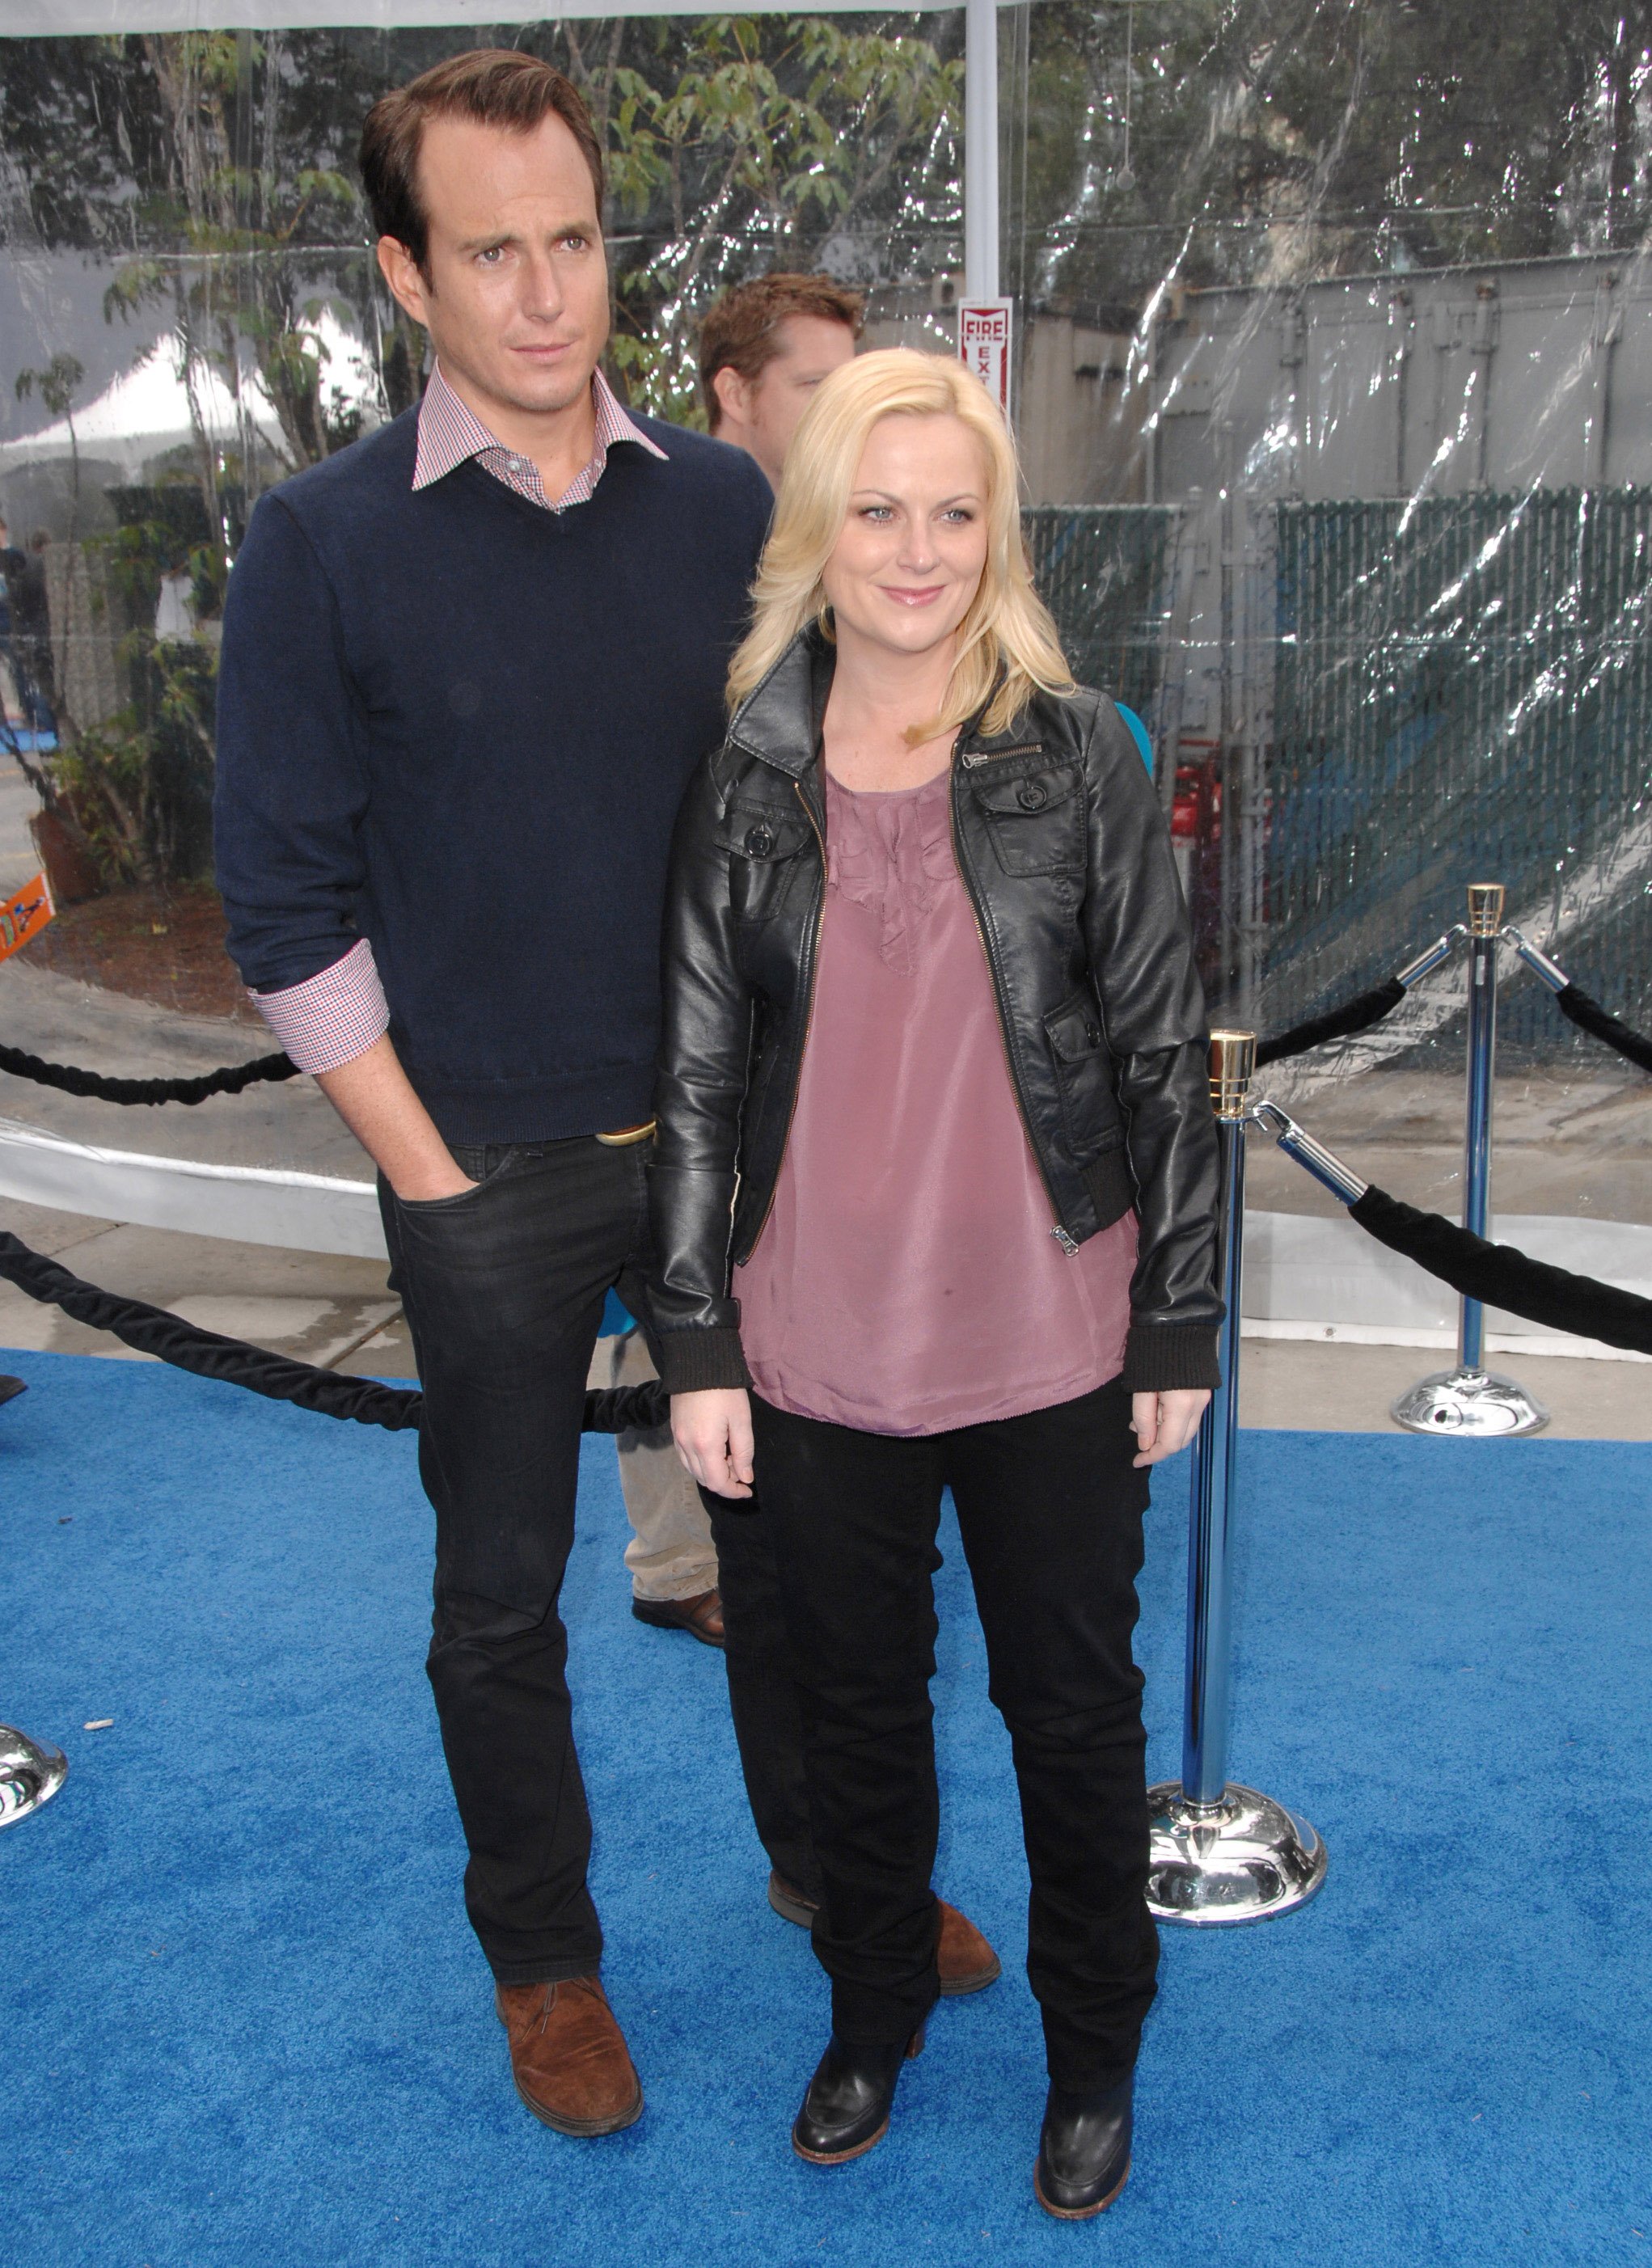 Will Arnett and Amy Poehler arrive at the Los Angeles premiere of "Monsters vs. Aliens" at the Gibson Amphitheatre on March 22, 2009, in Universal City, California. | Source: Getty Images